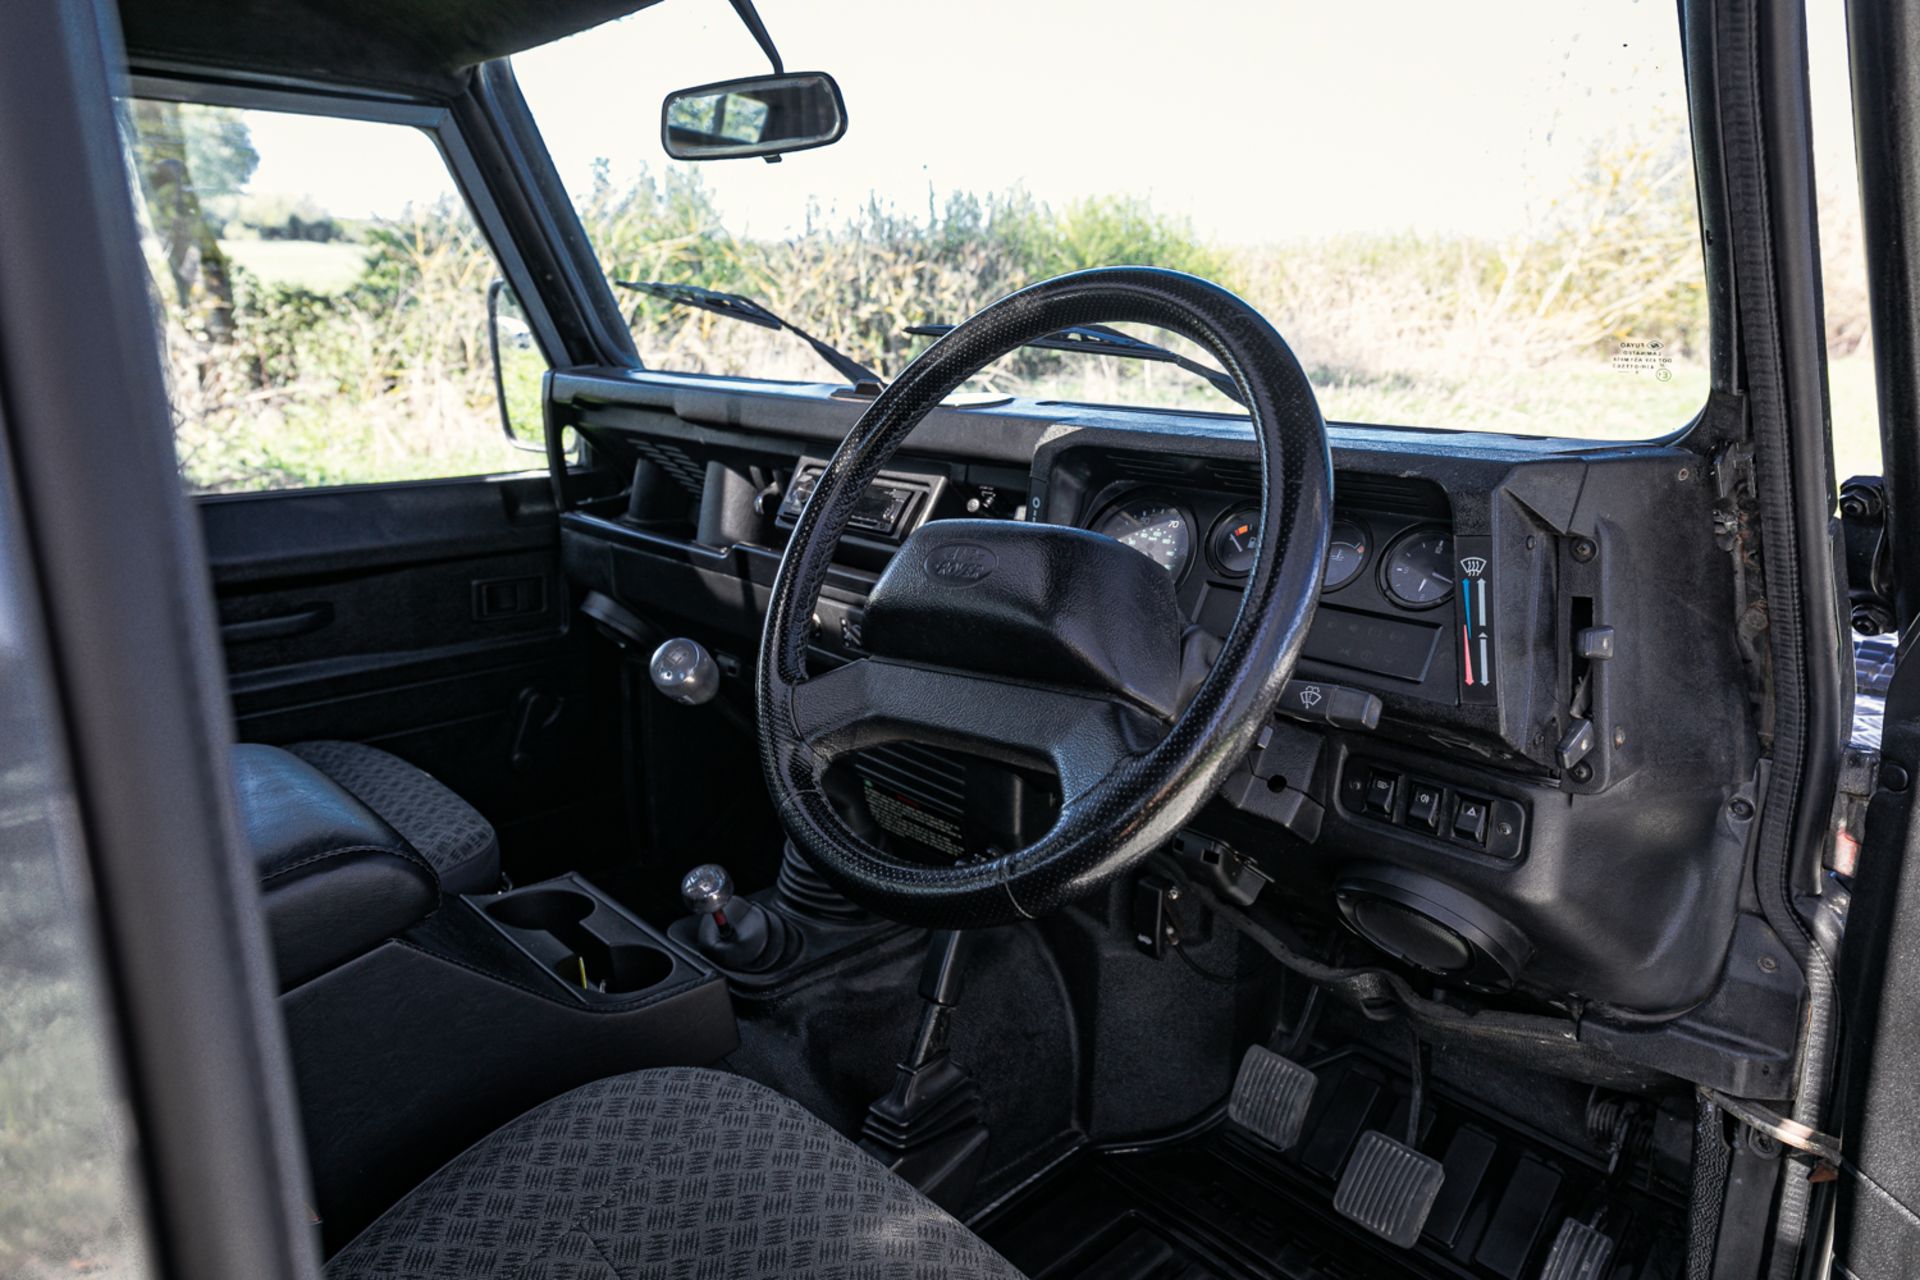 2001 Land Rover Defender 90 'Tomb Raider' - Image 7 of 23